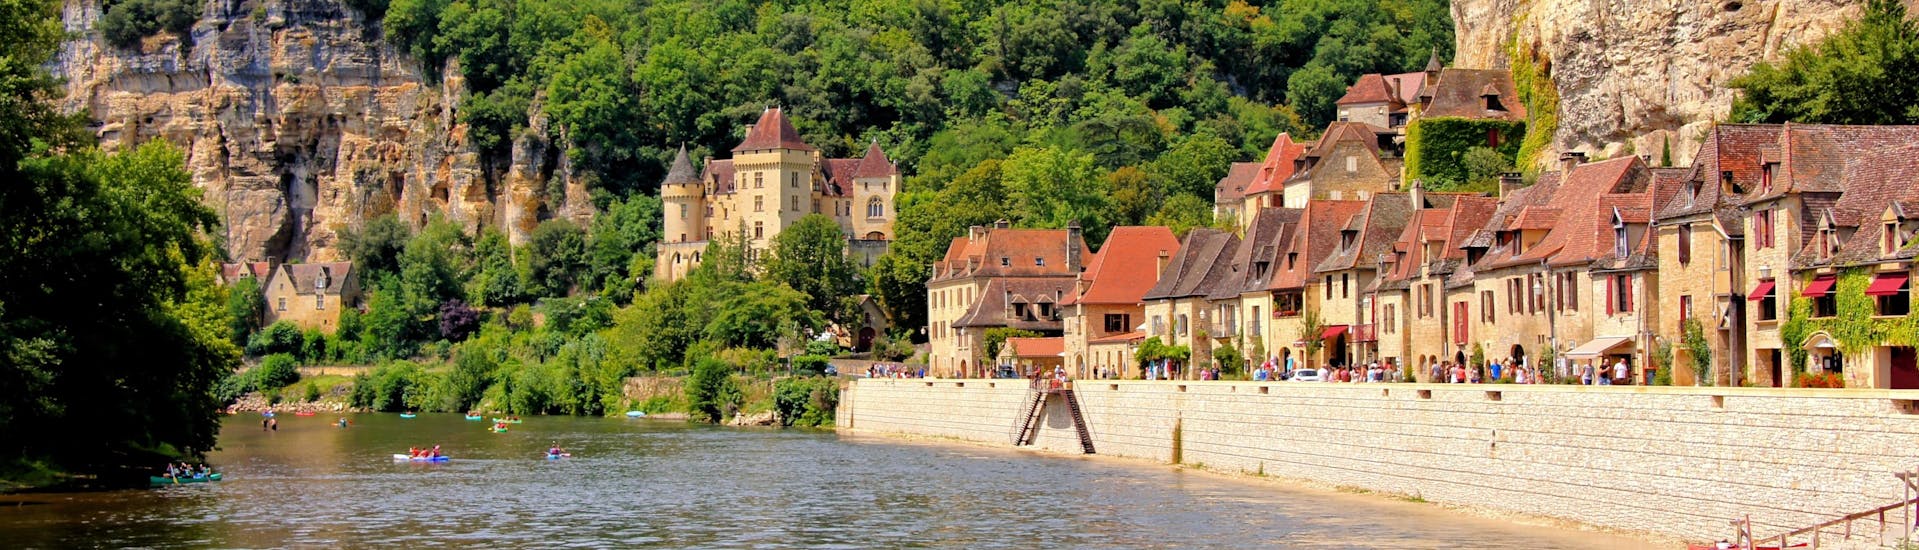 Beautiful view of the village of La Roque-Gageac on the Dordogne River on which tourists do canoeing during summer.